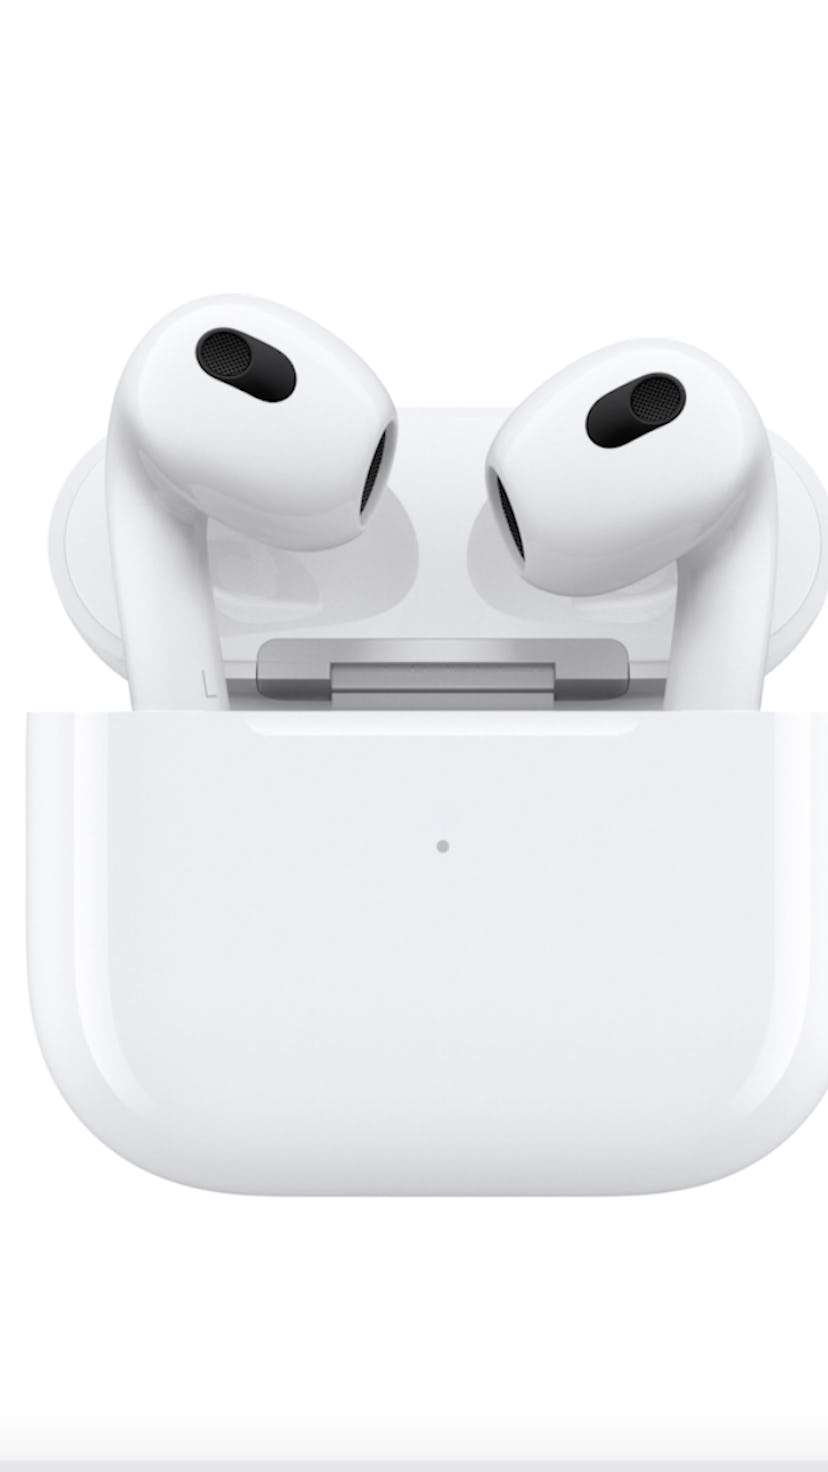 Apple Airpods 3 features, price, and design, explained.